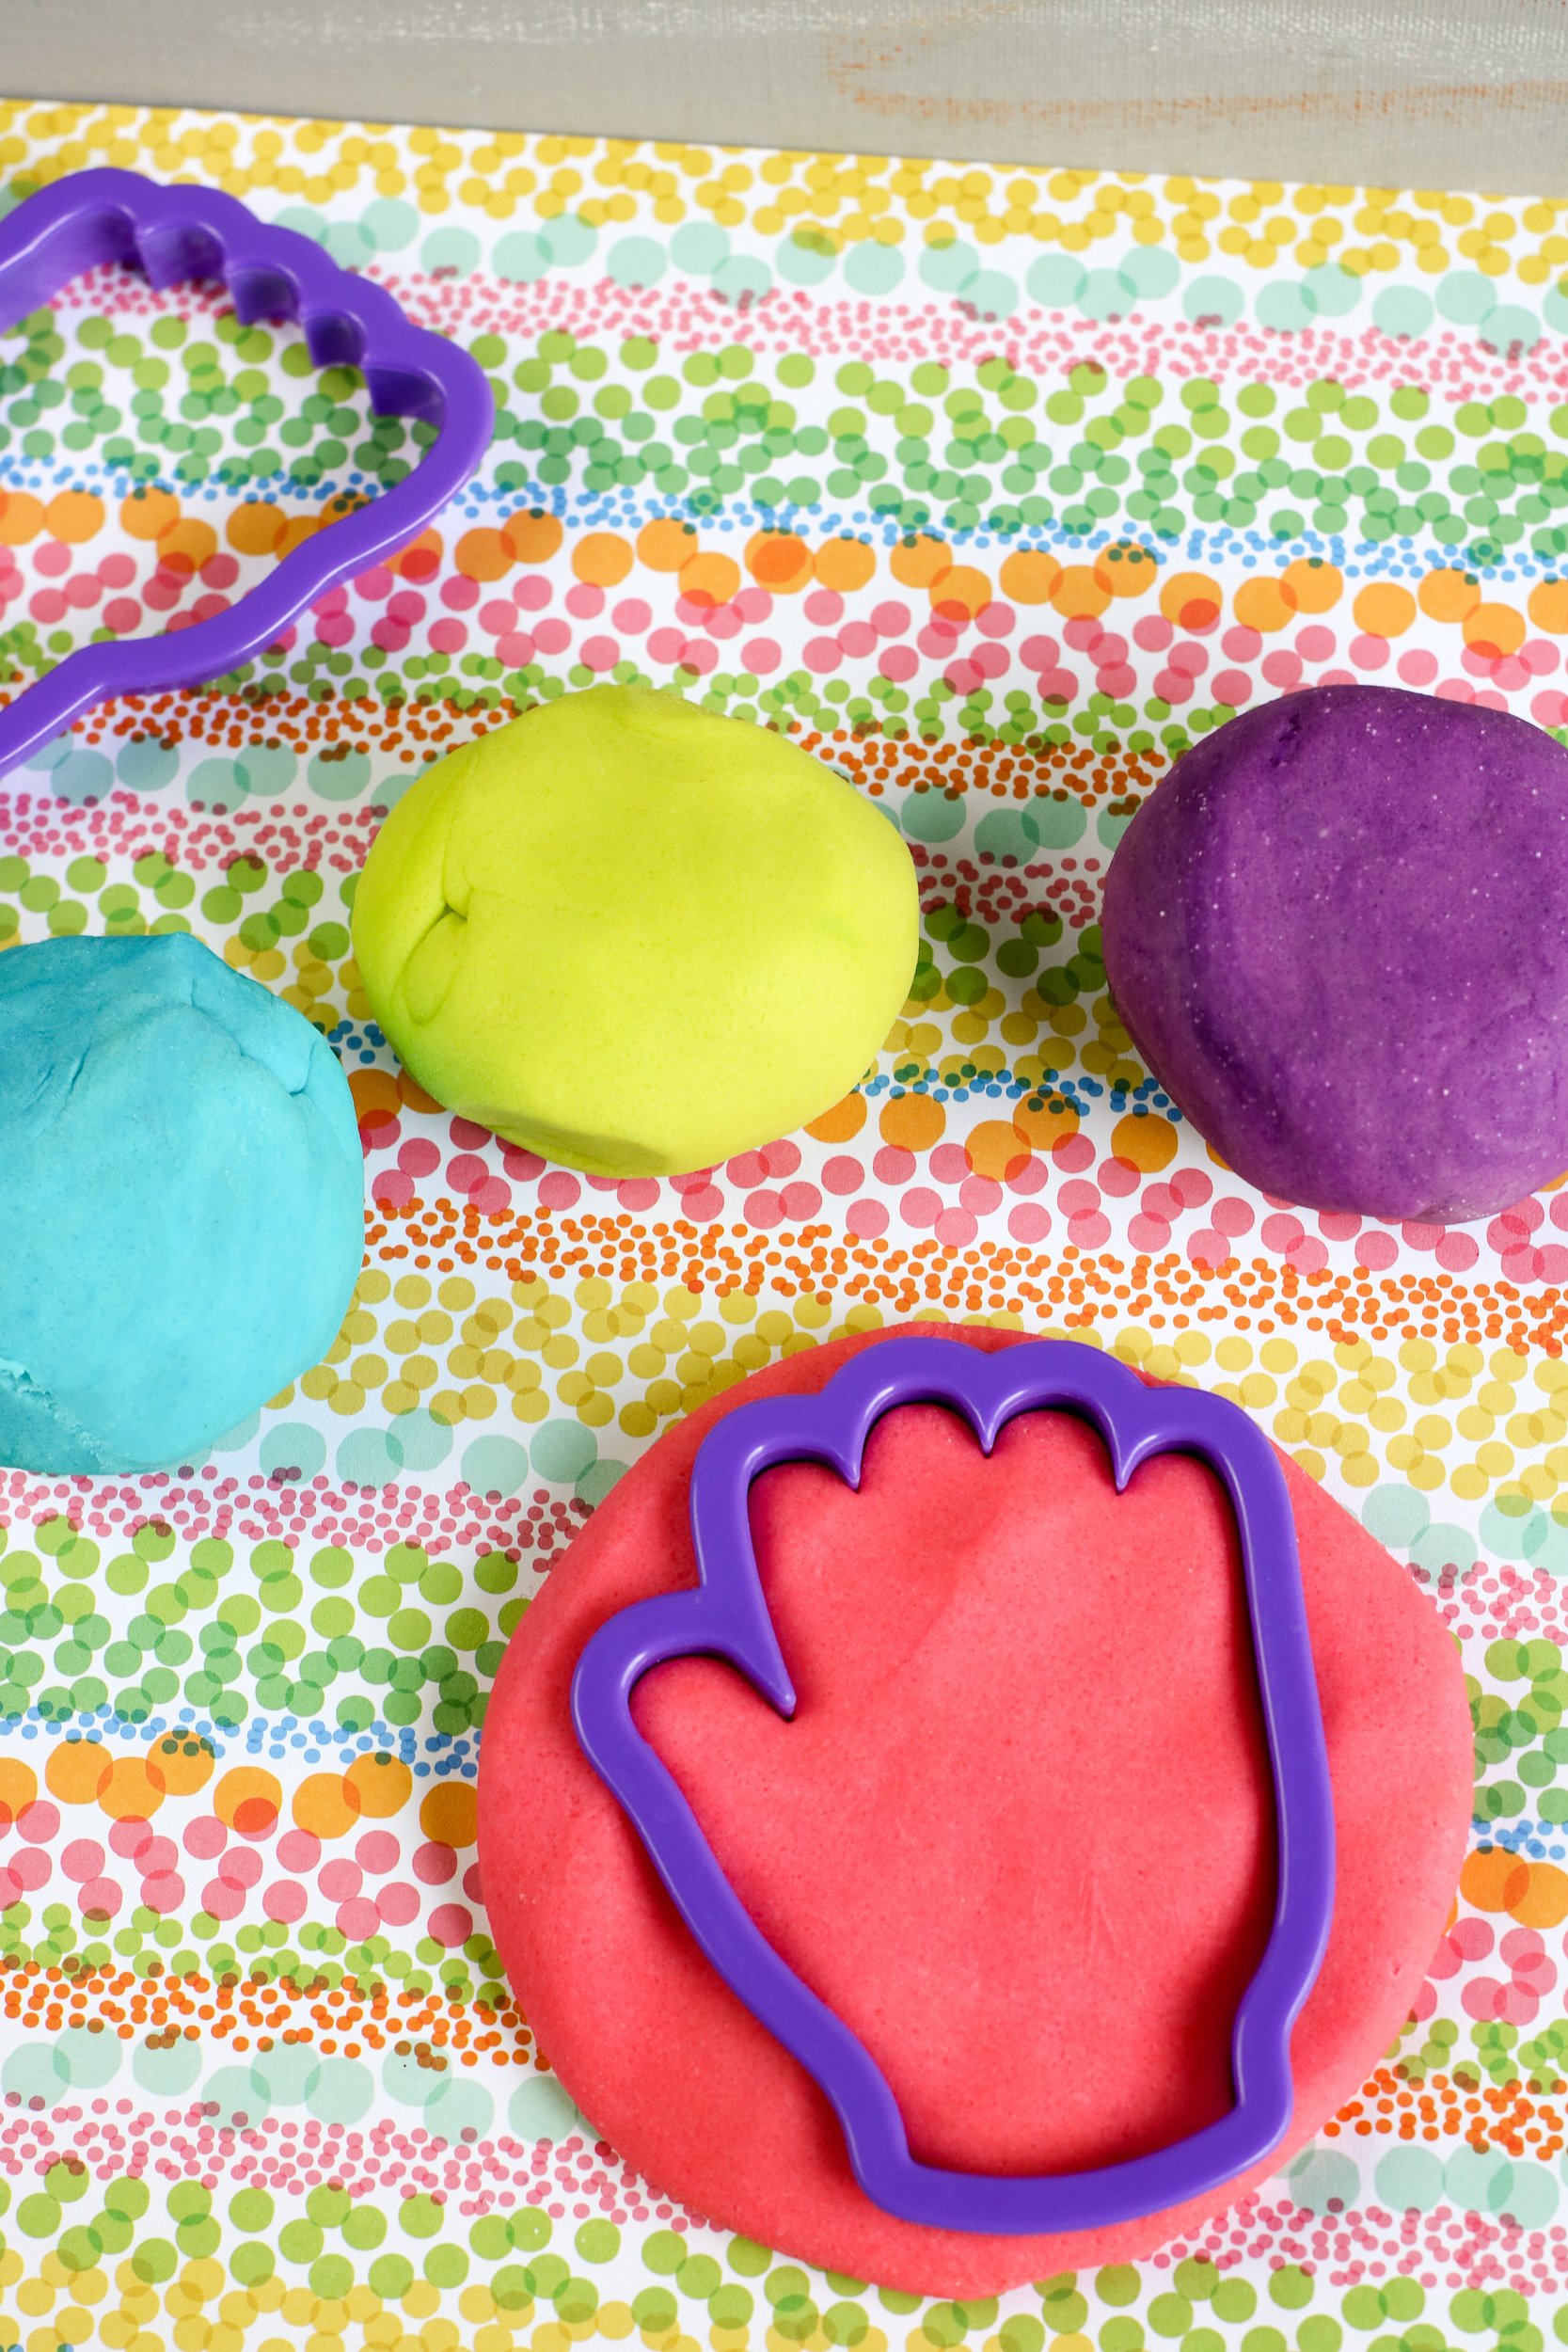 Some playdough with a cutter making a shape.